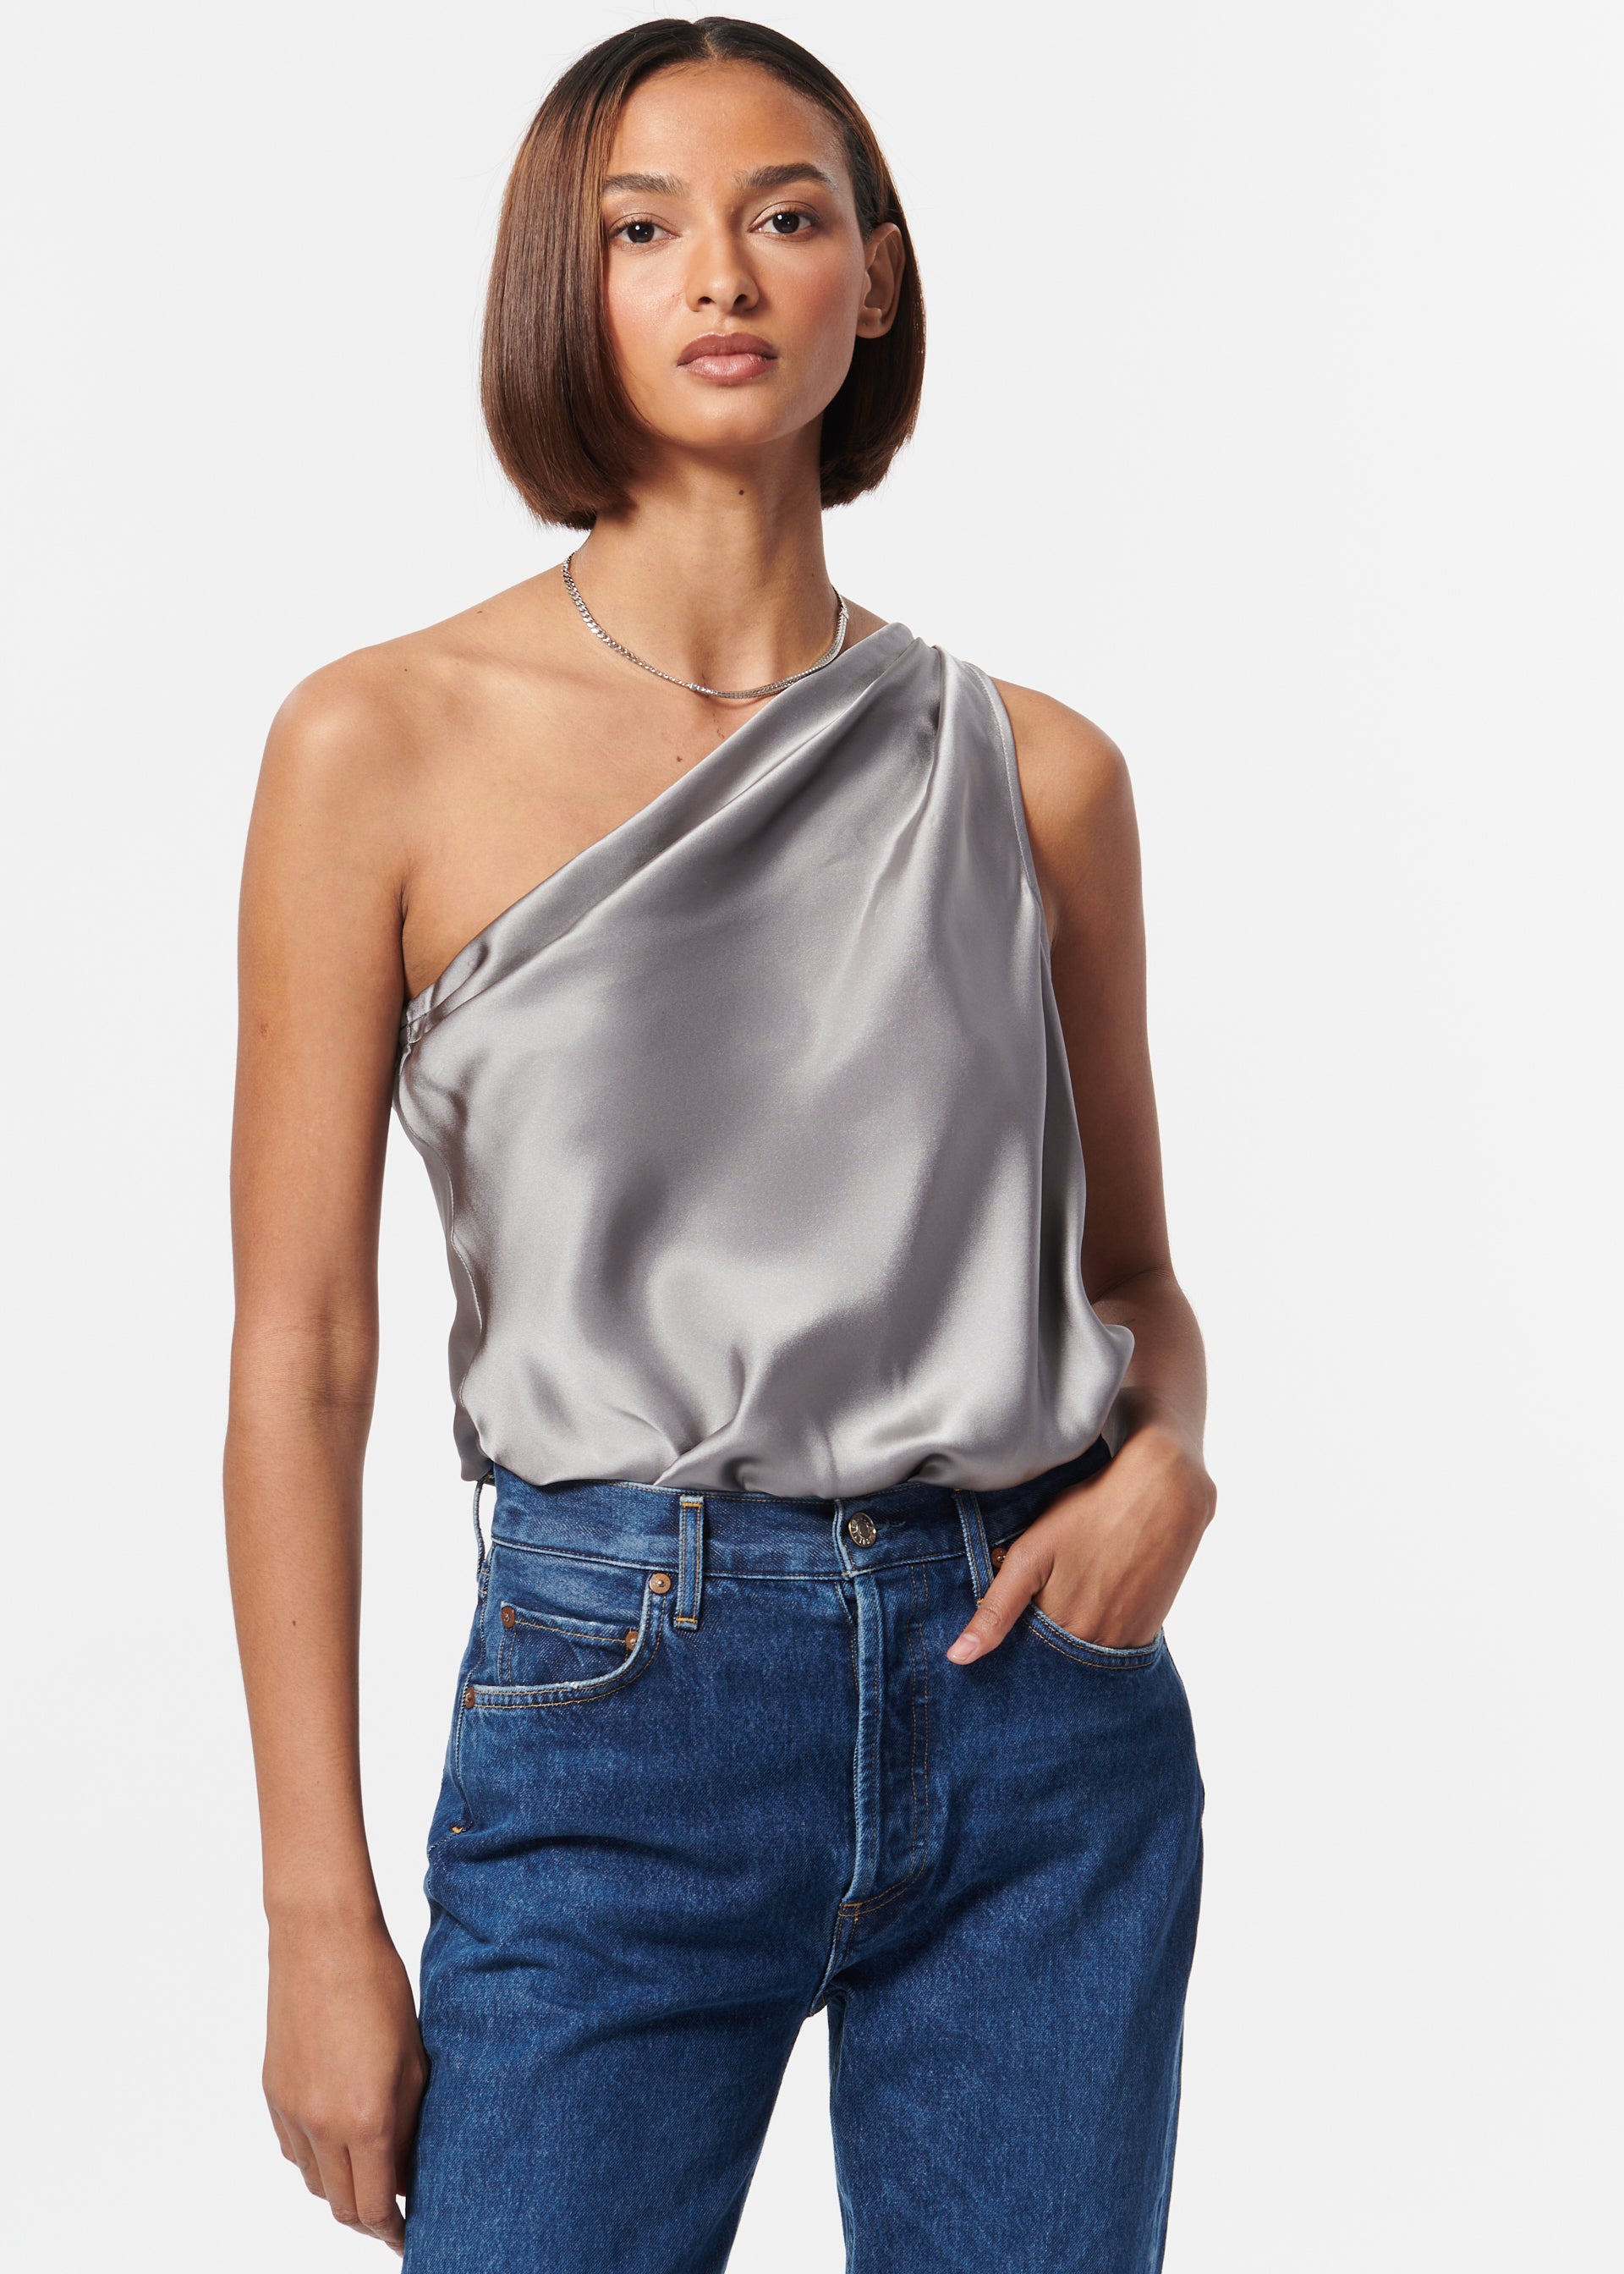 CAMI NYC Darby Bodysuit in Cosmo Ombre